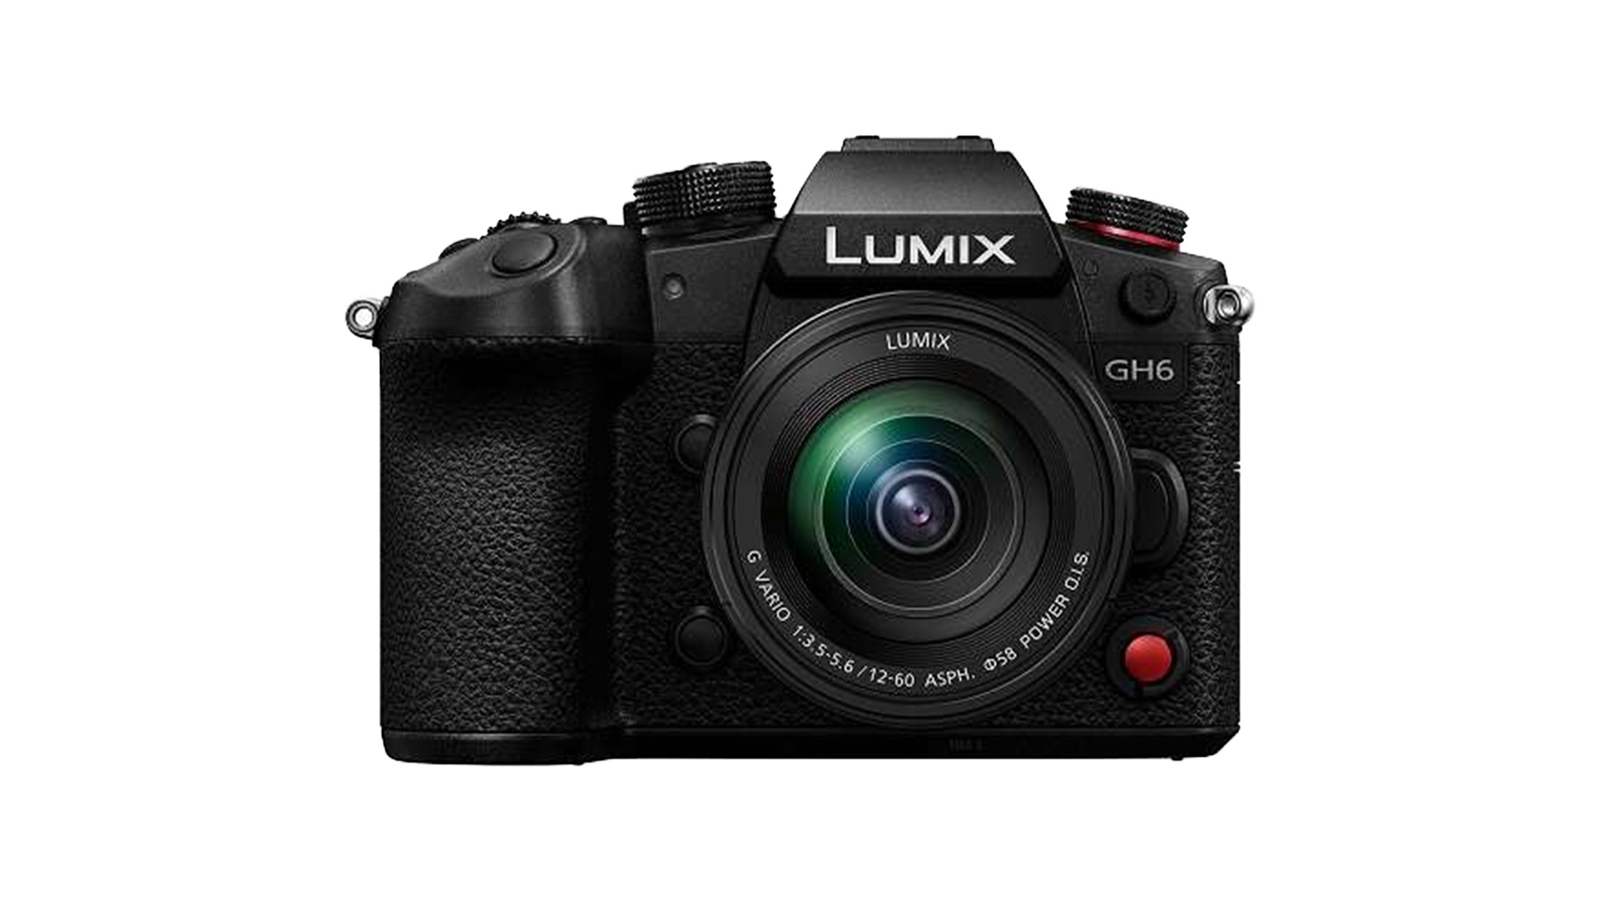 Panasonic Lumix GH6 - The greatest camera at the top end for YouTube